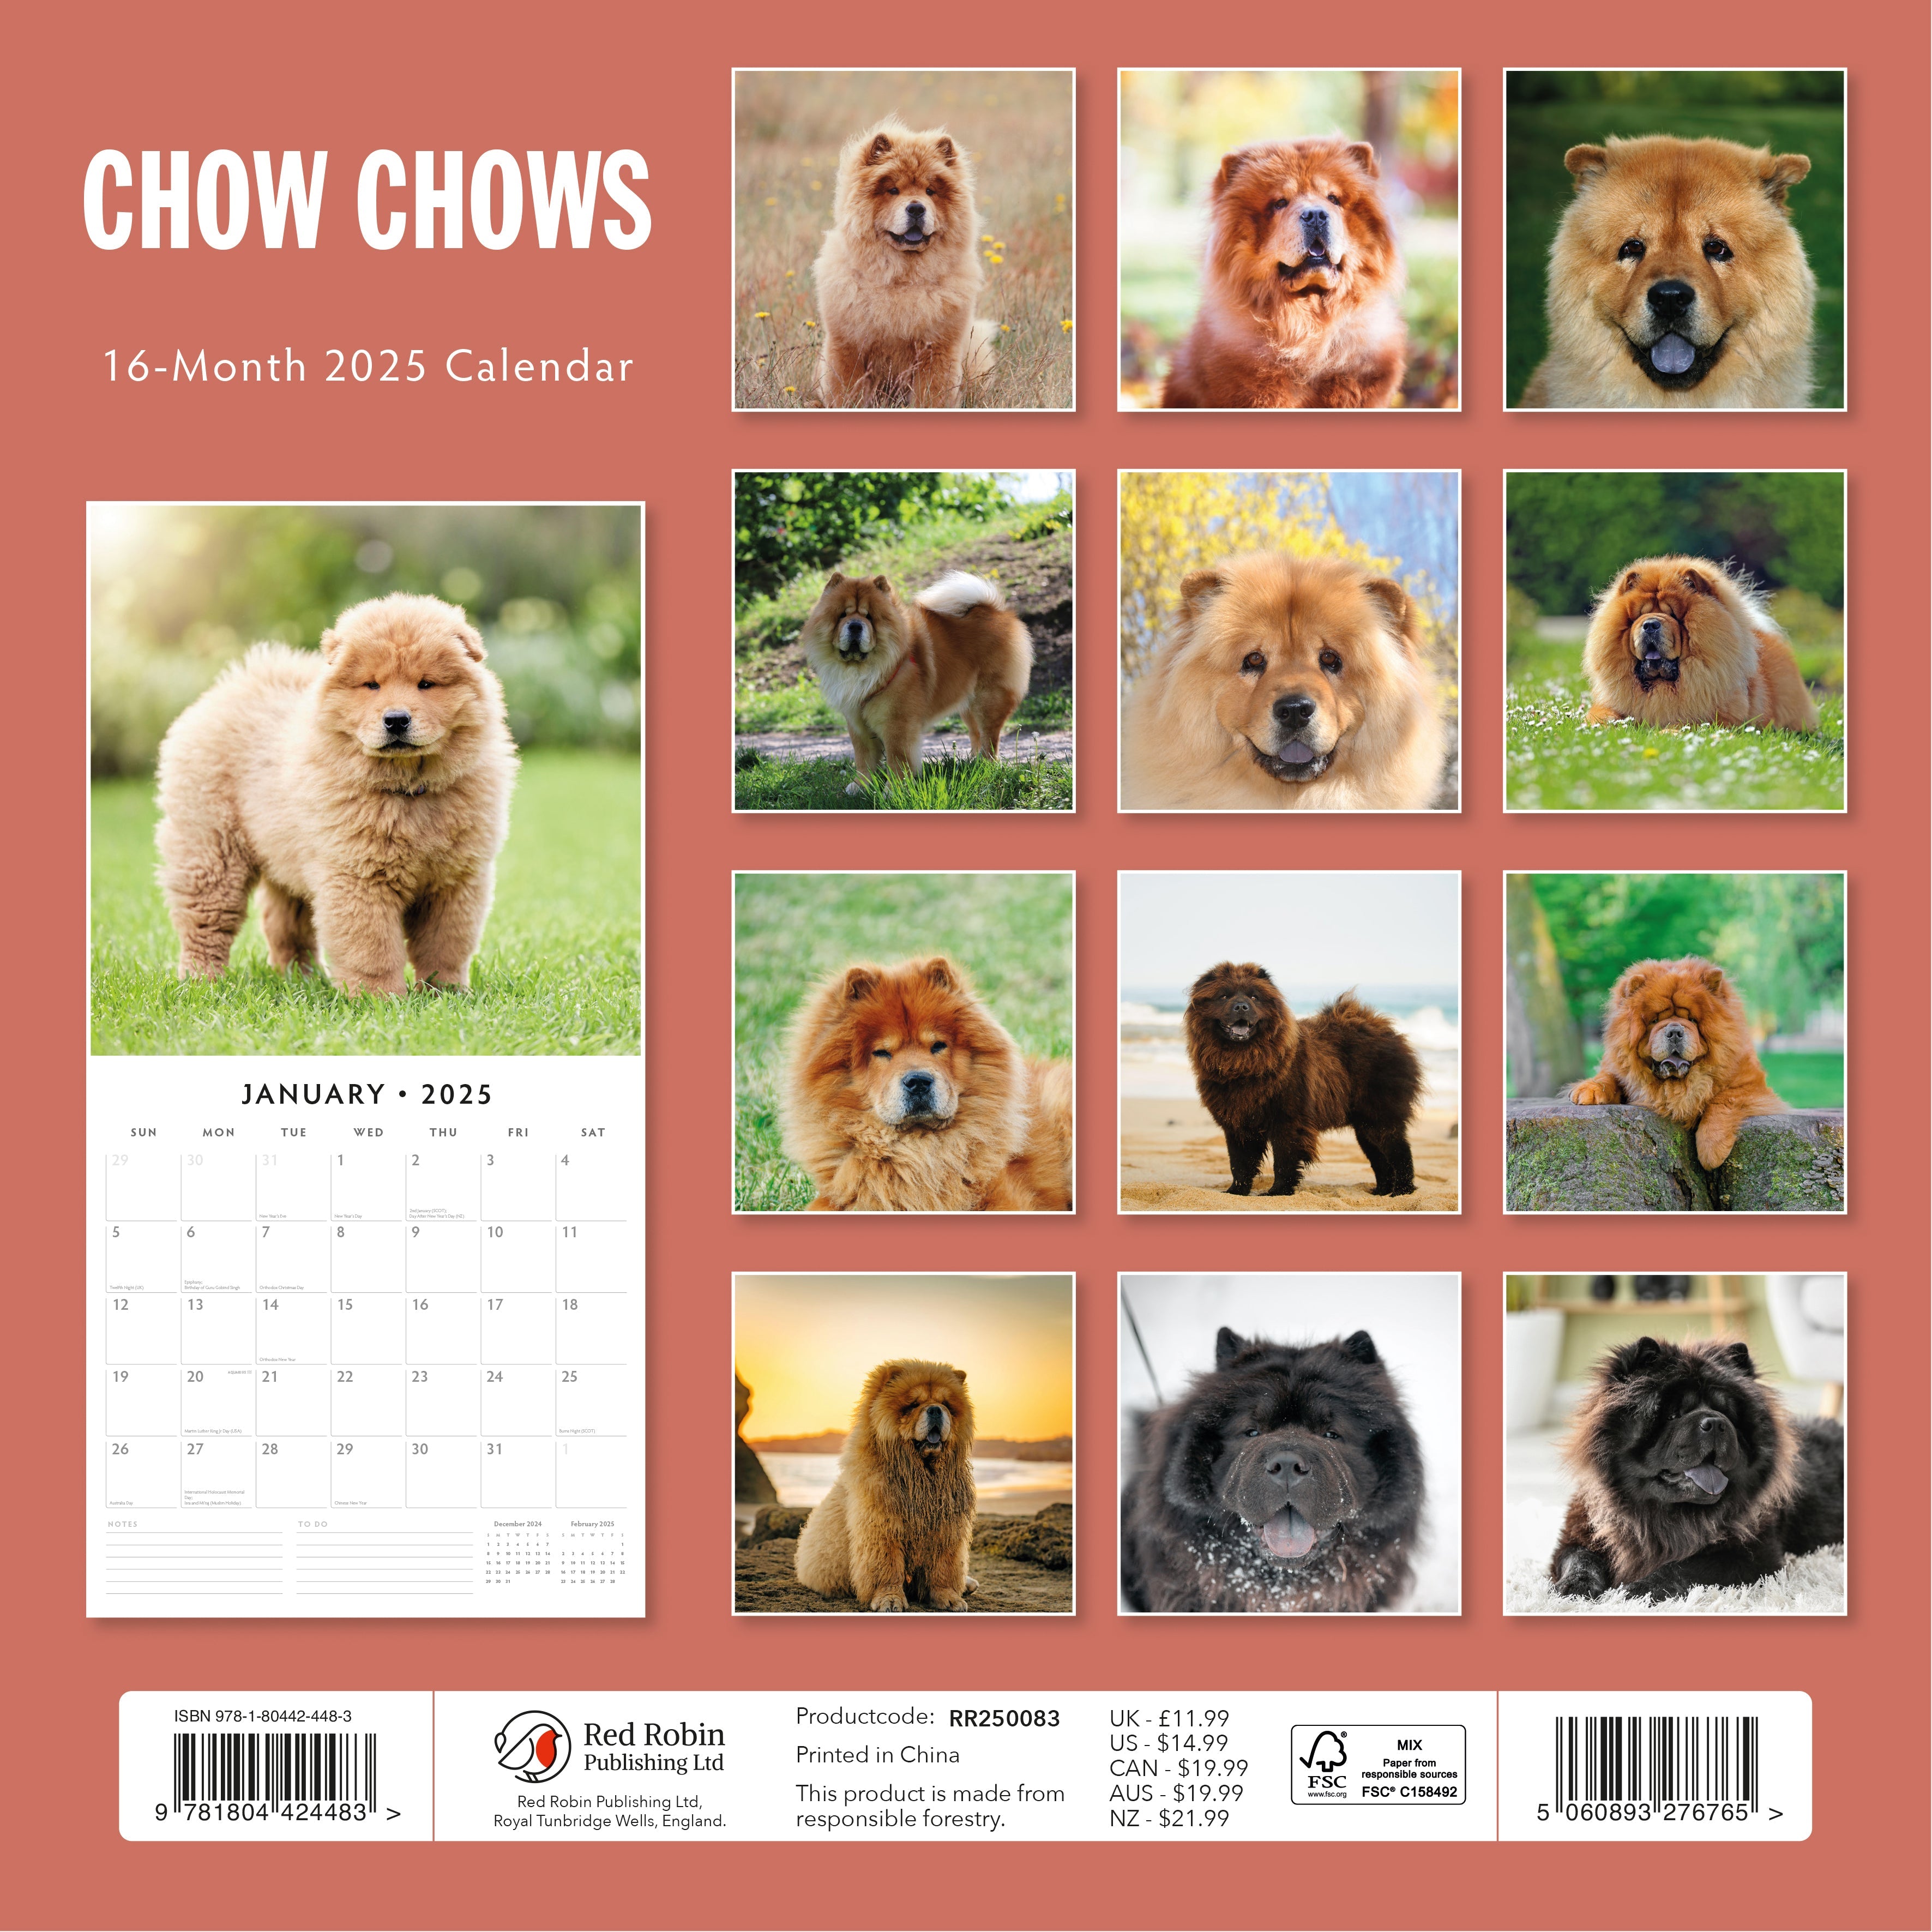 2025 Chow Chows - Square Wall Calendar